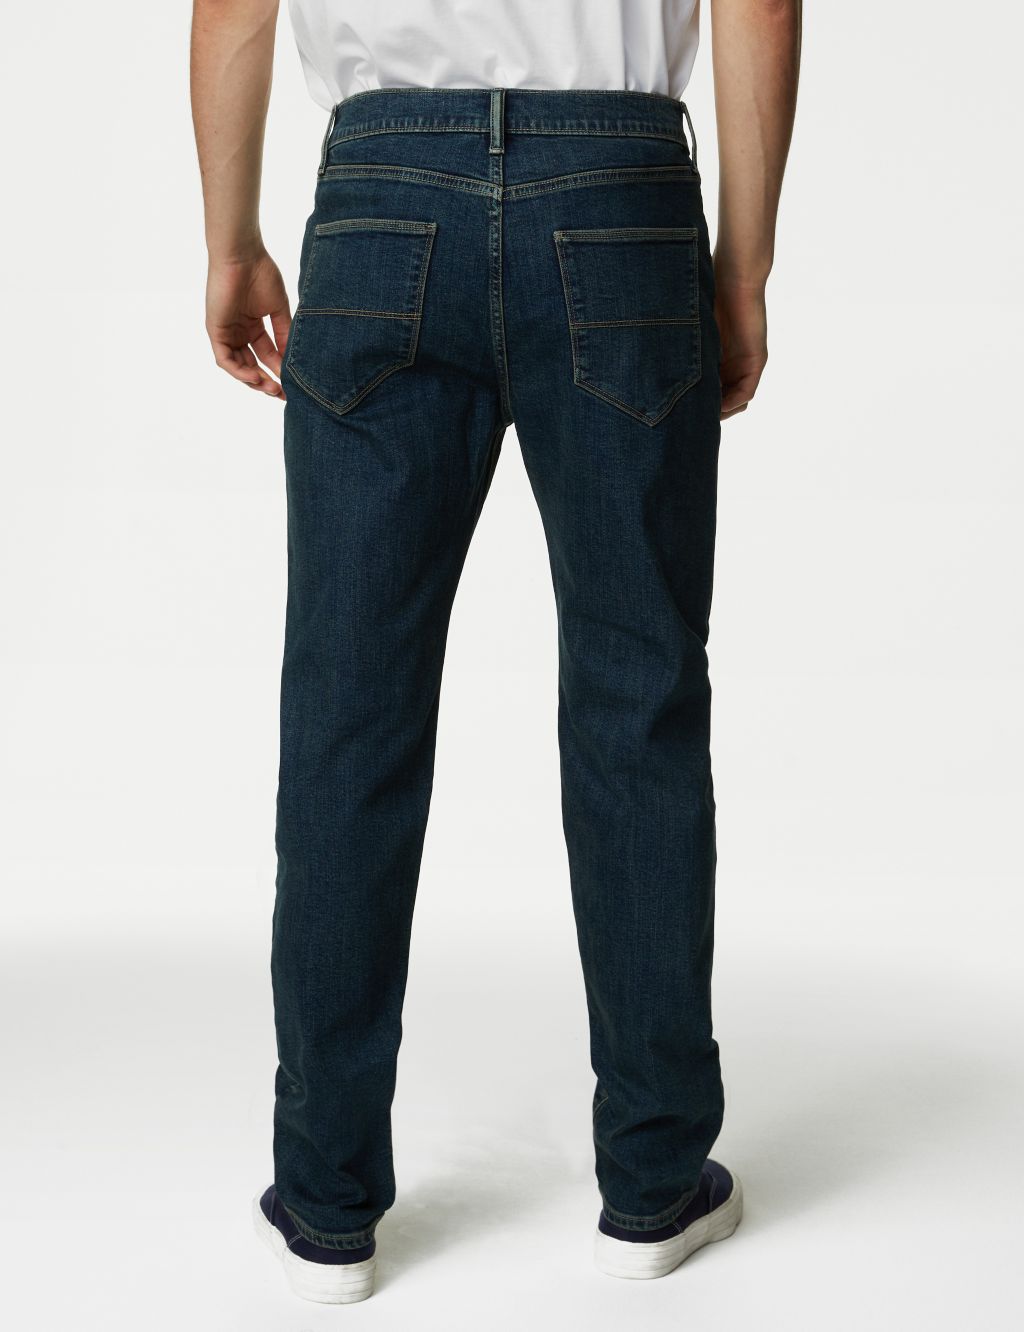 Straight Fit Stretch Jeans image 5